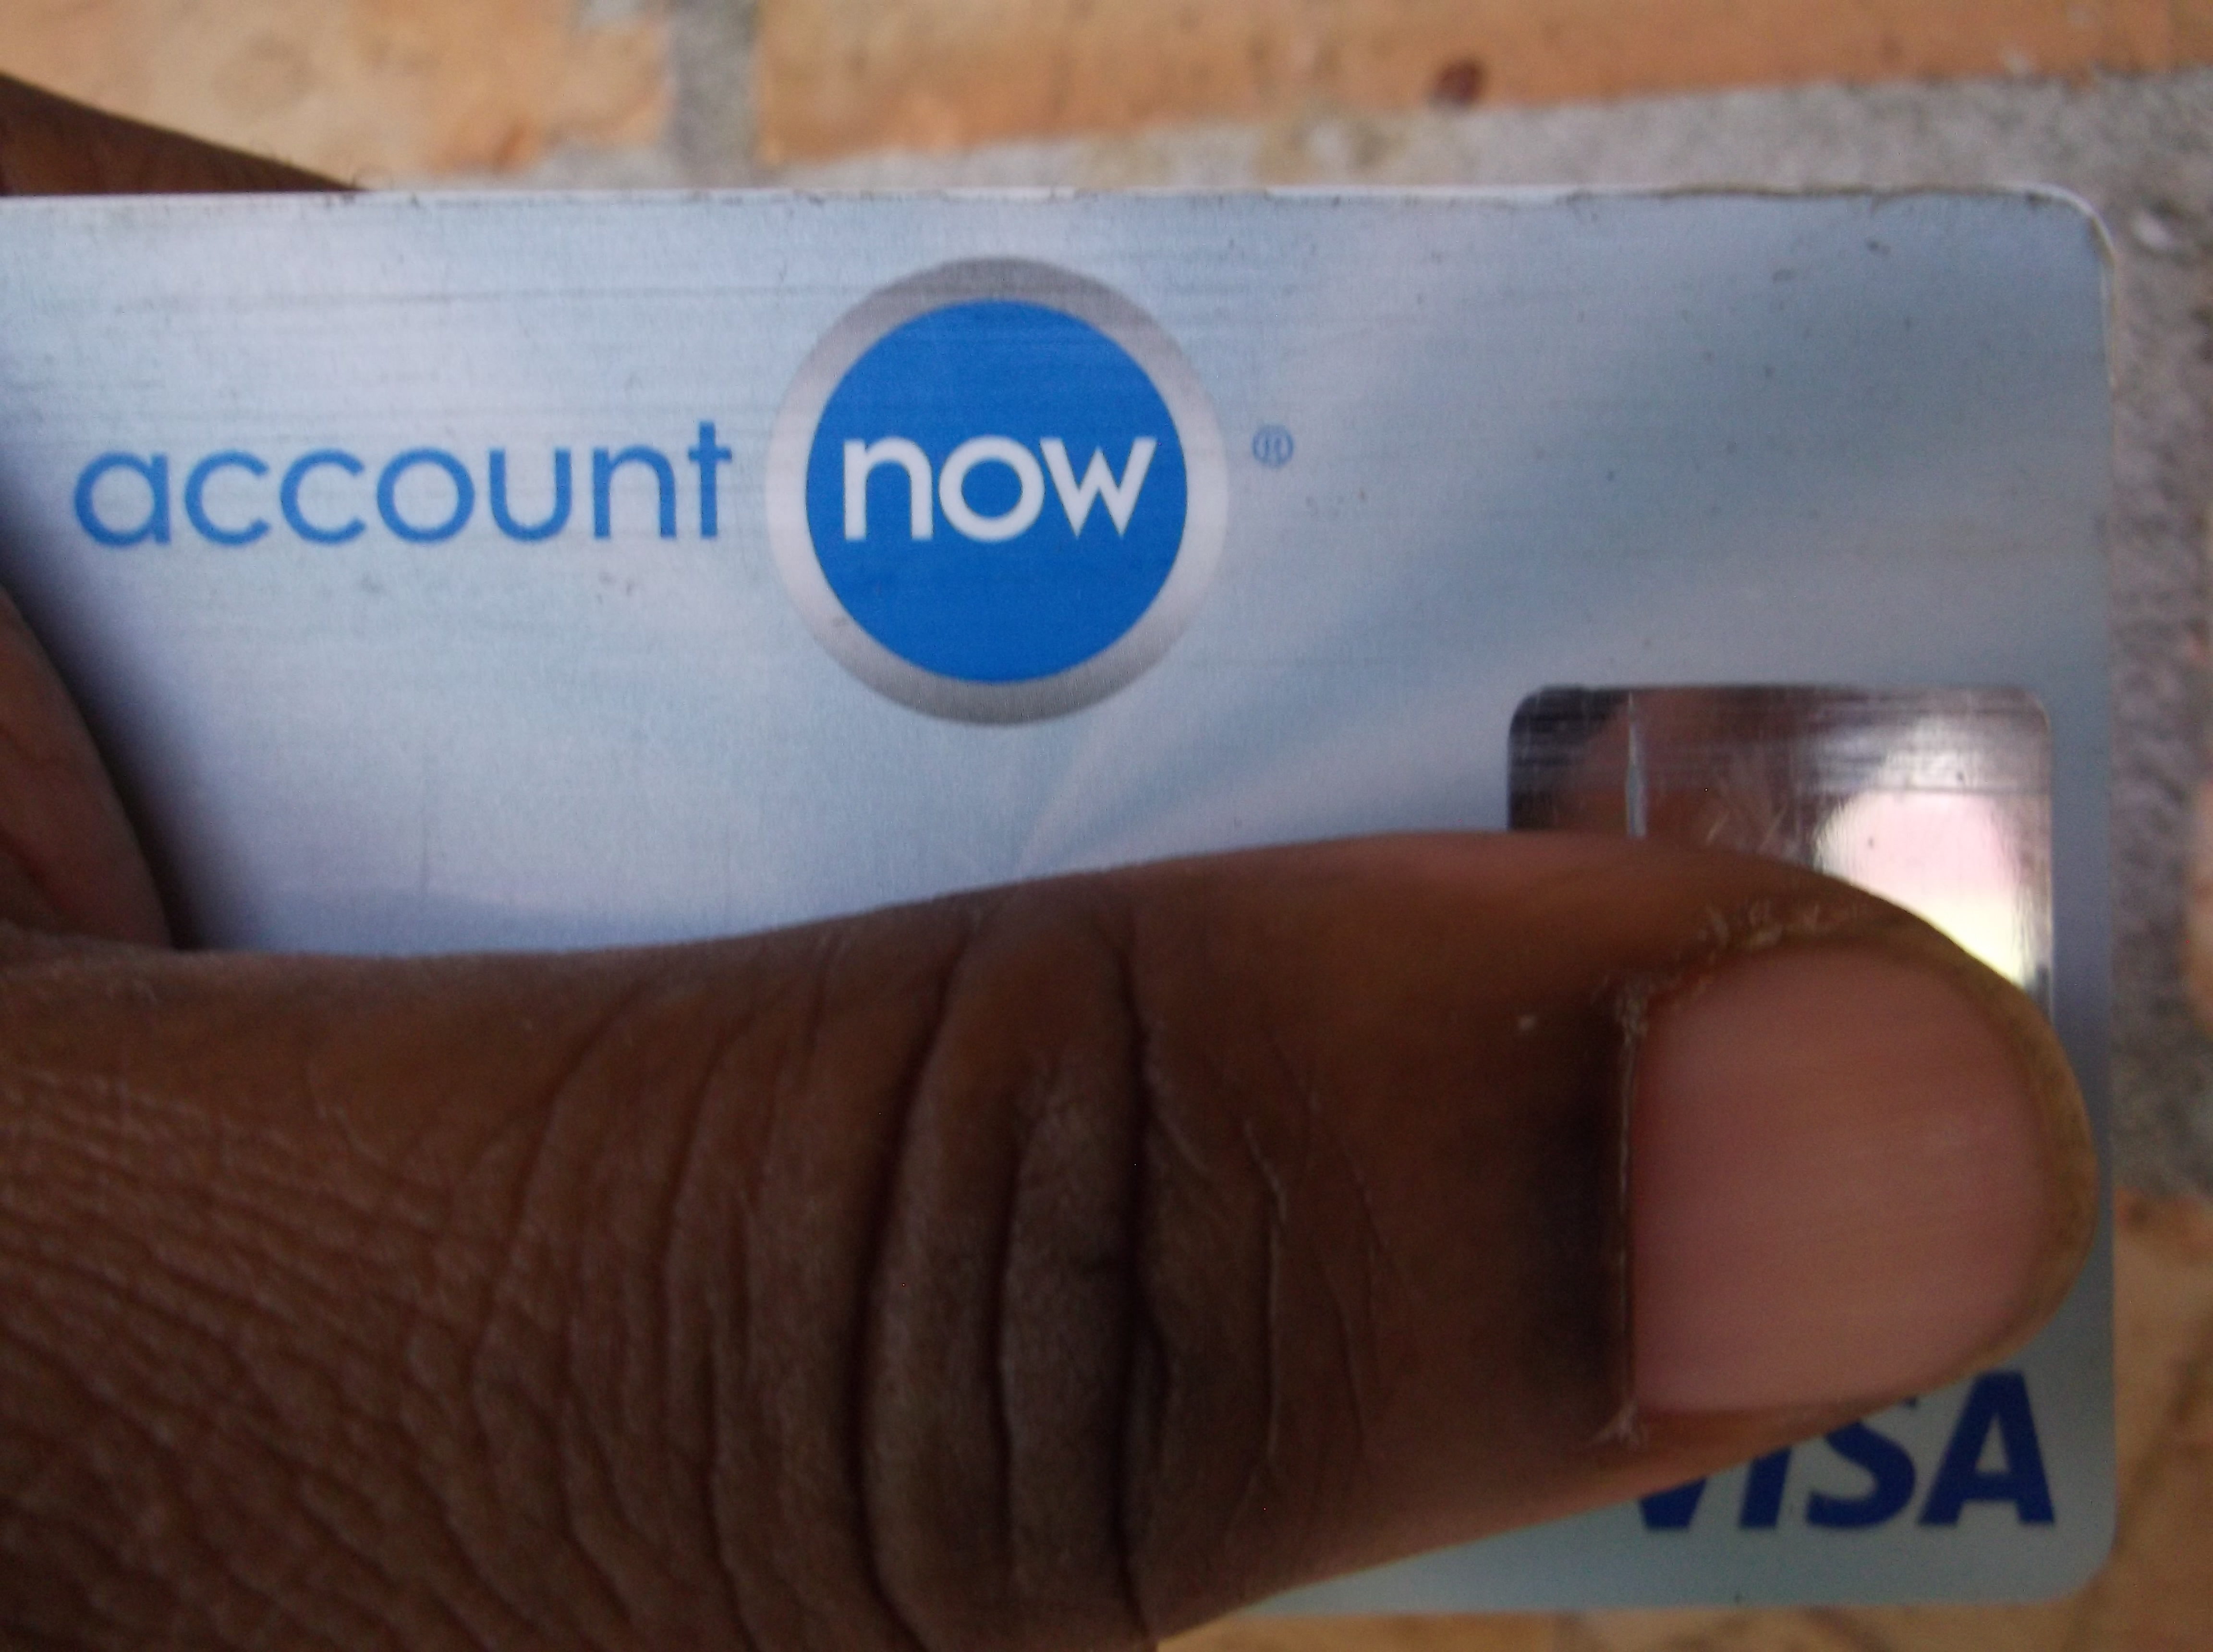 How do you activate your AccountNow card?